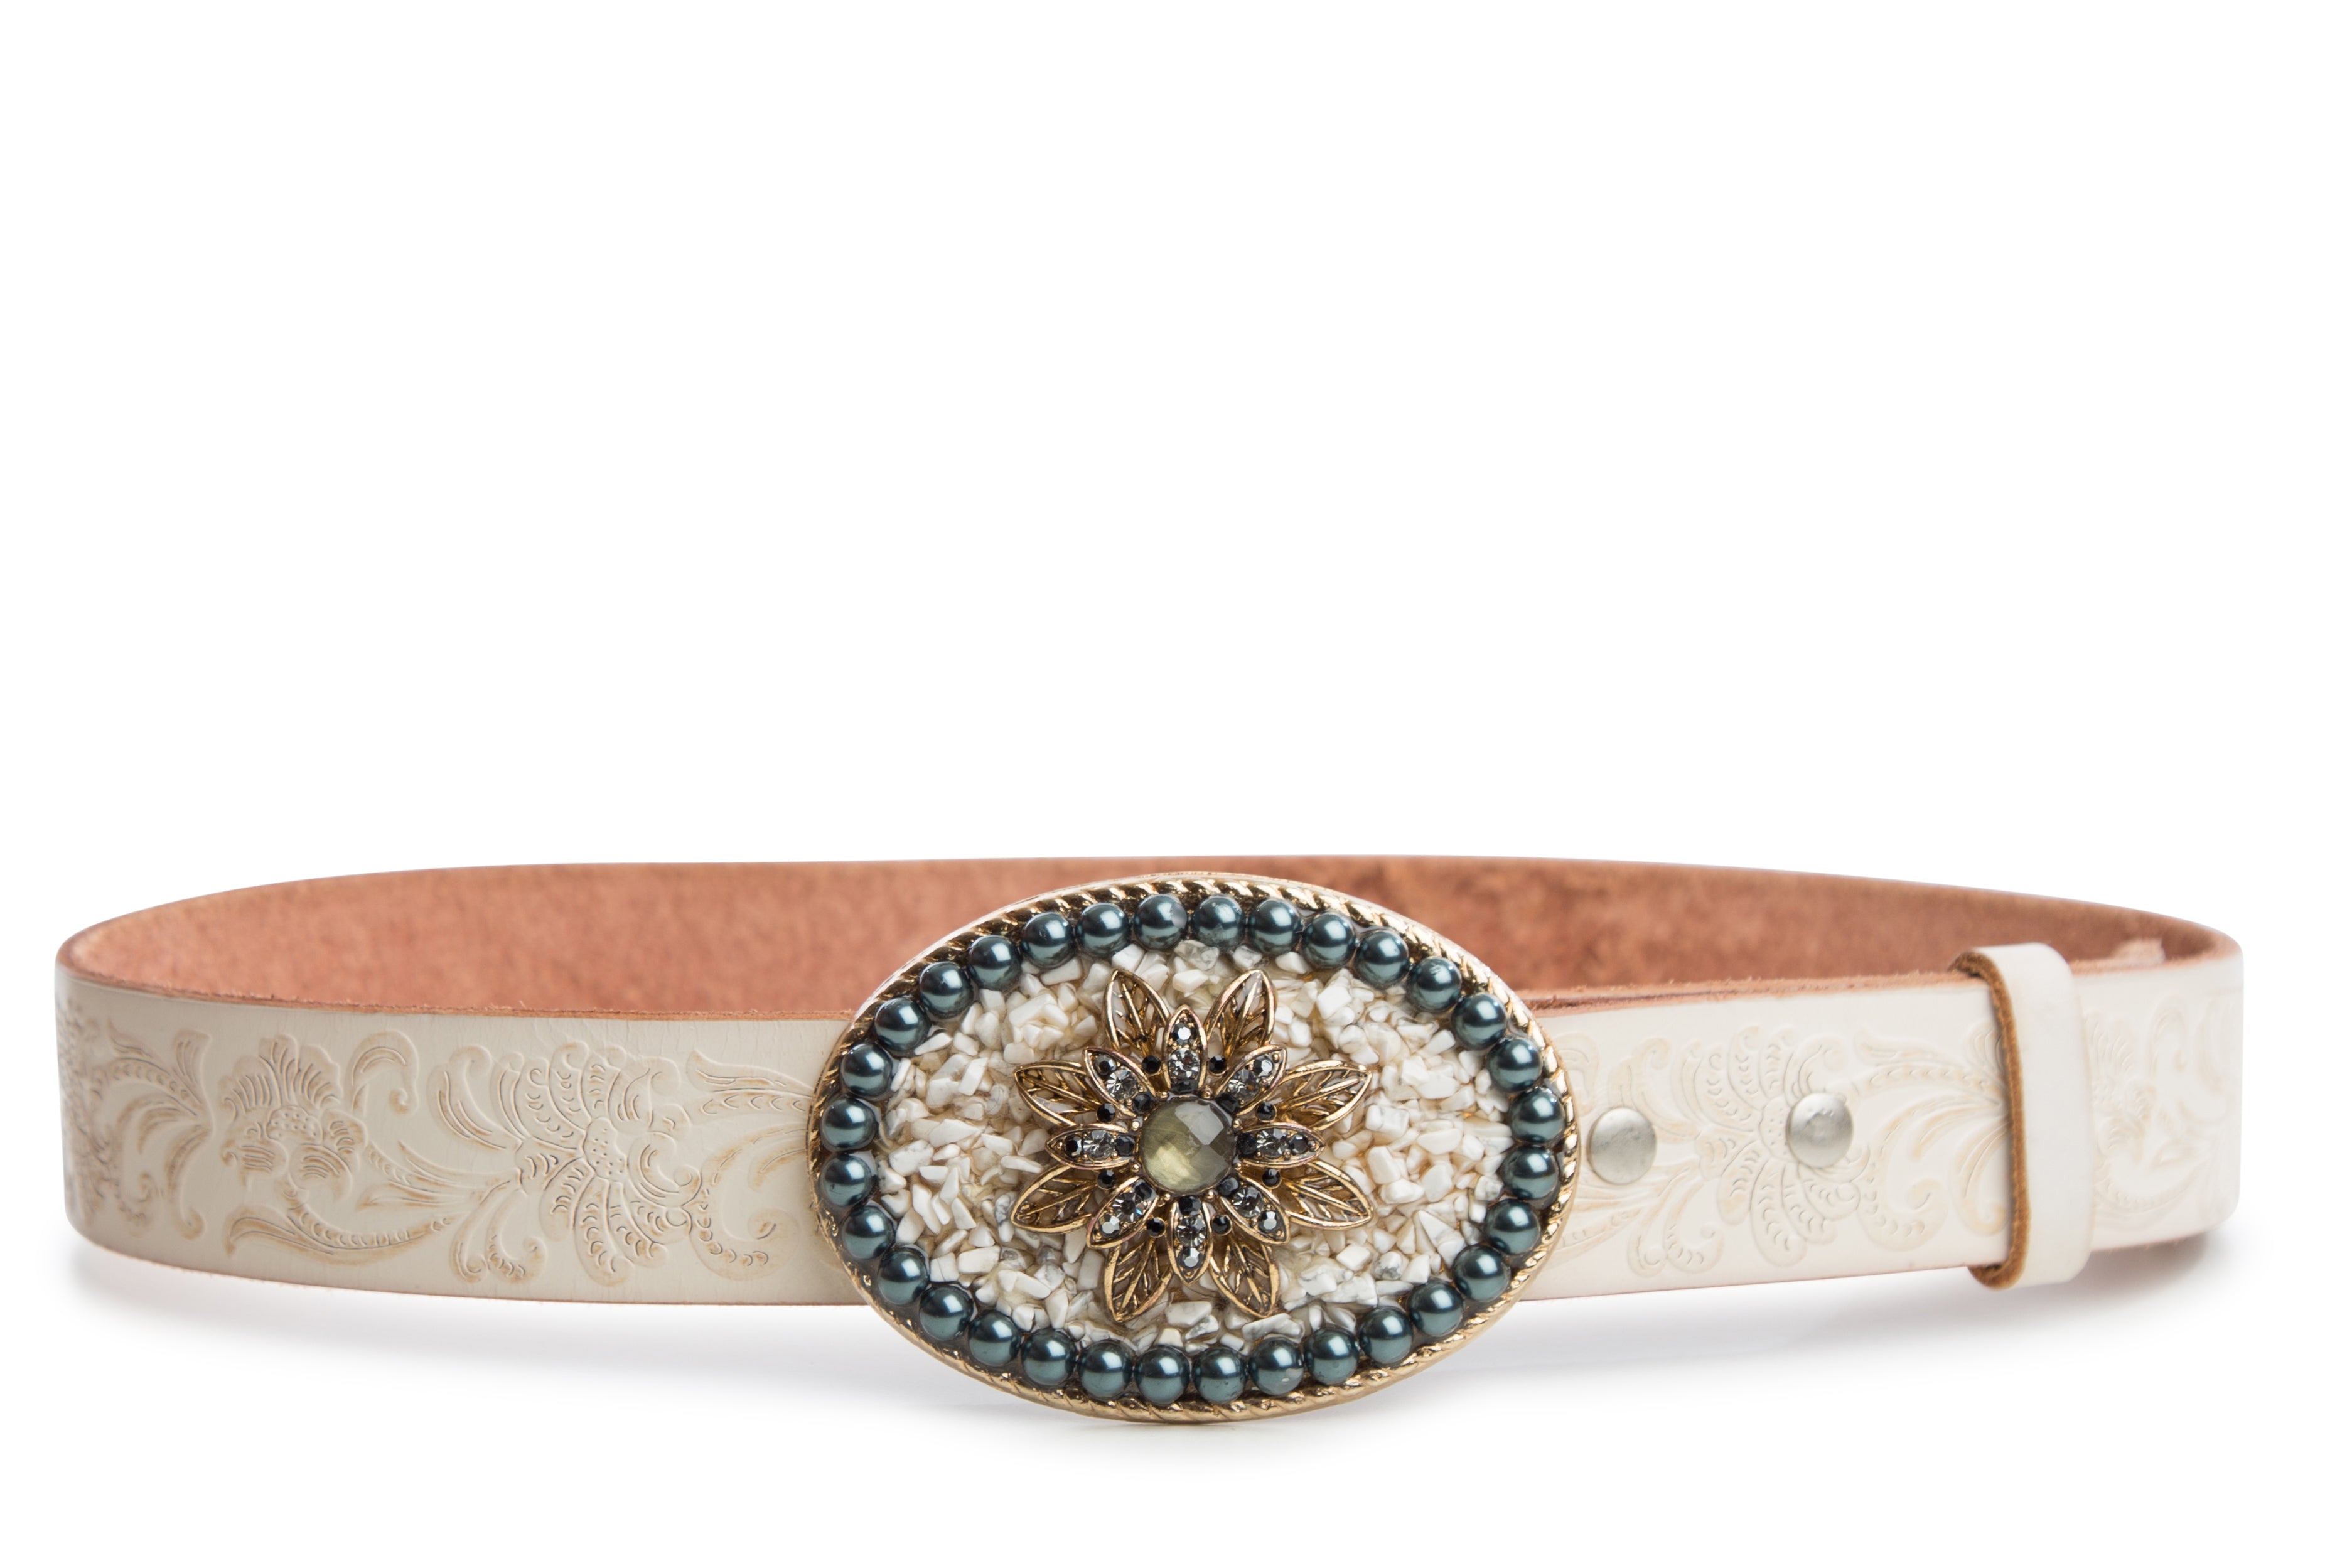 Vintage - embossed Leather Belt with Pearl and Gemstone Buckle